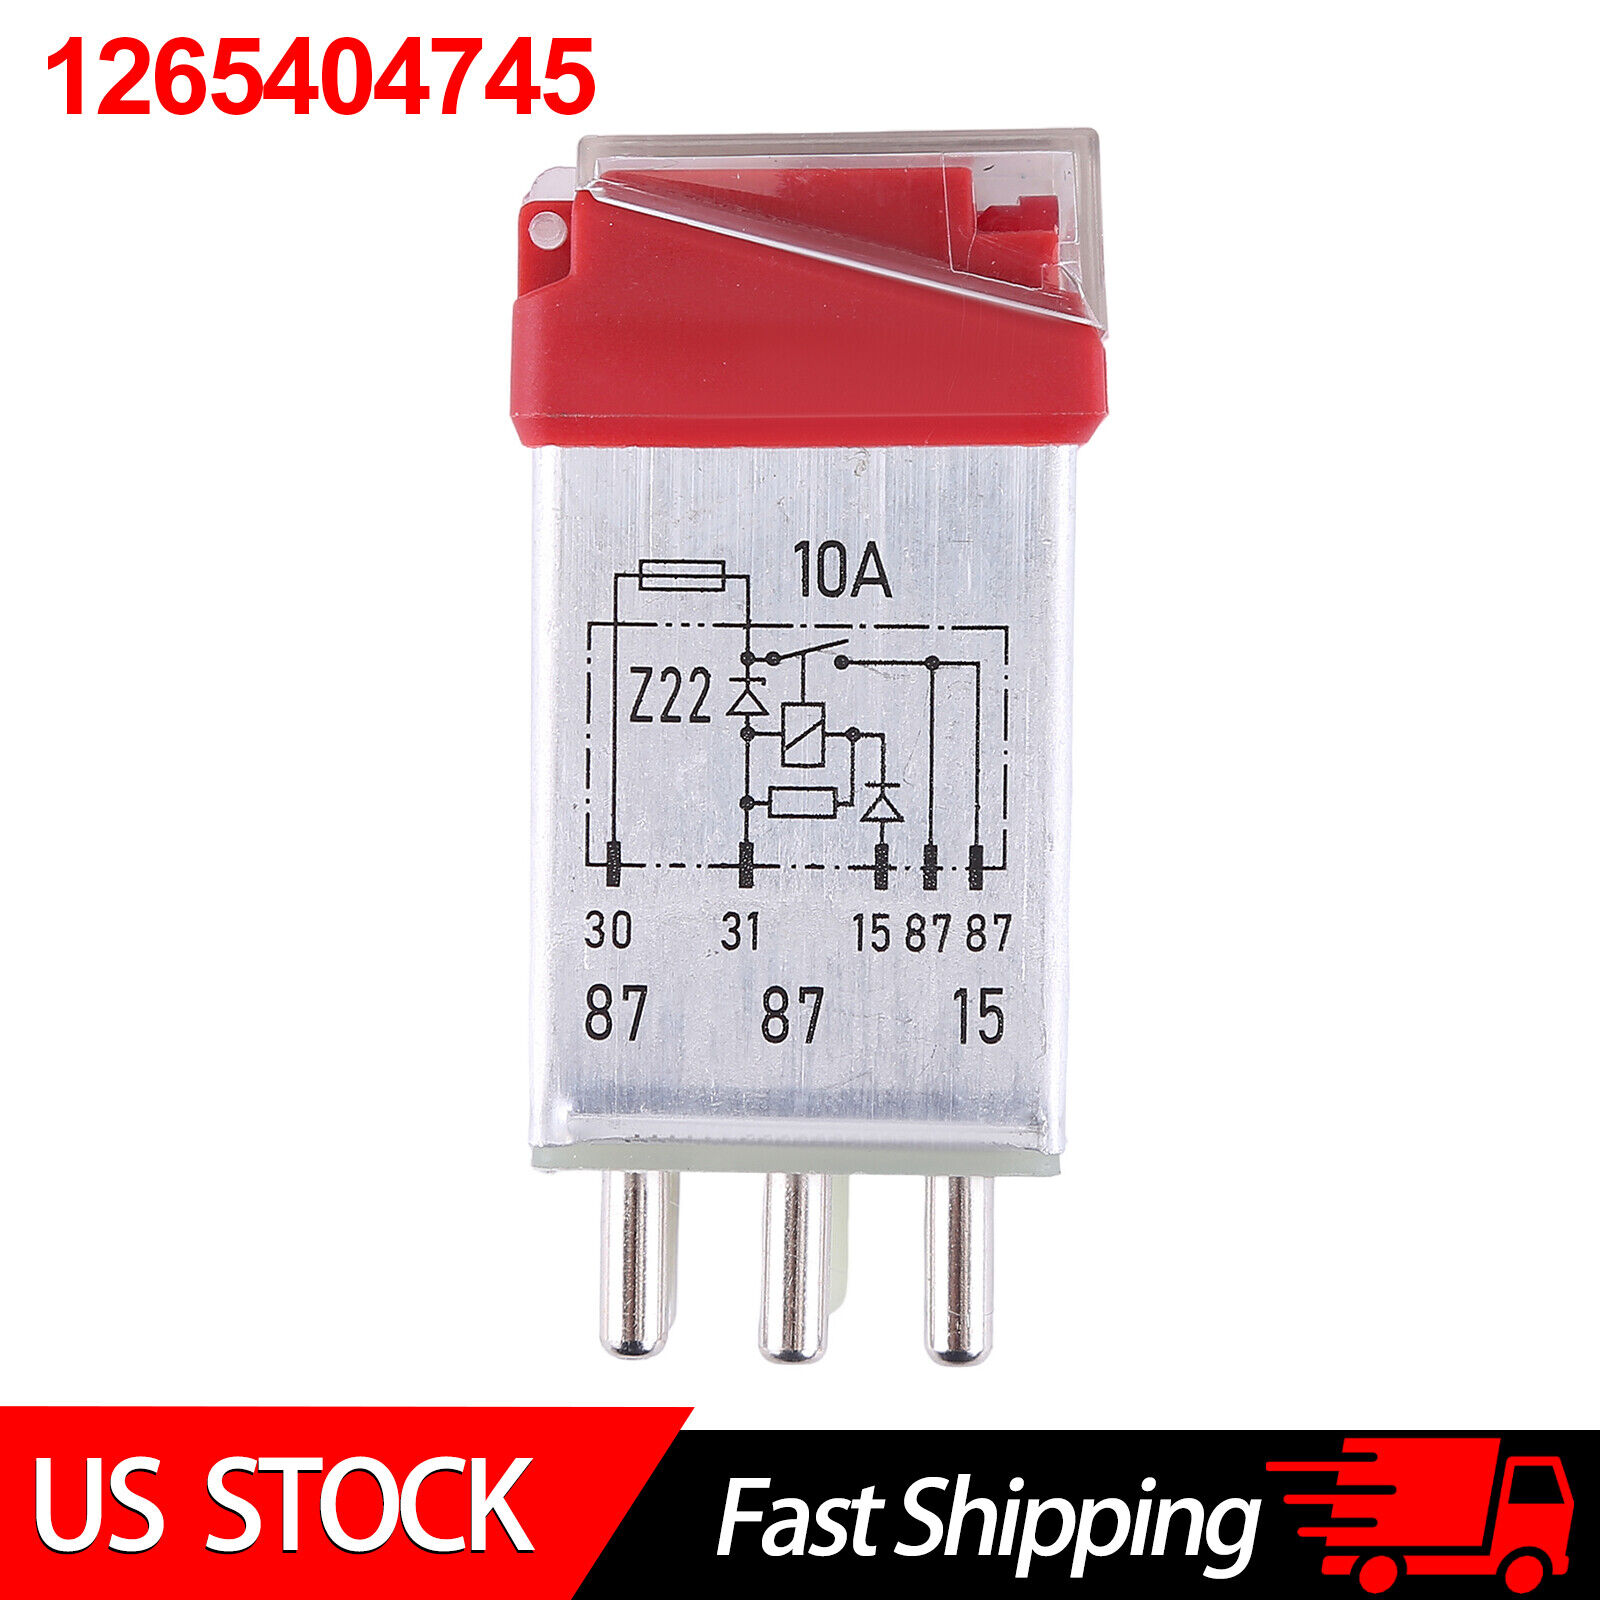 New Overload Protection Relay 2015400845 For Mercedes W124 W126 W201 R107 W201